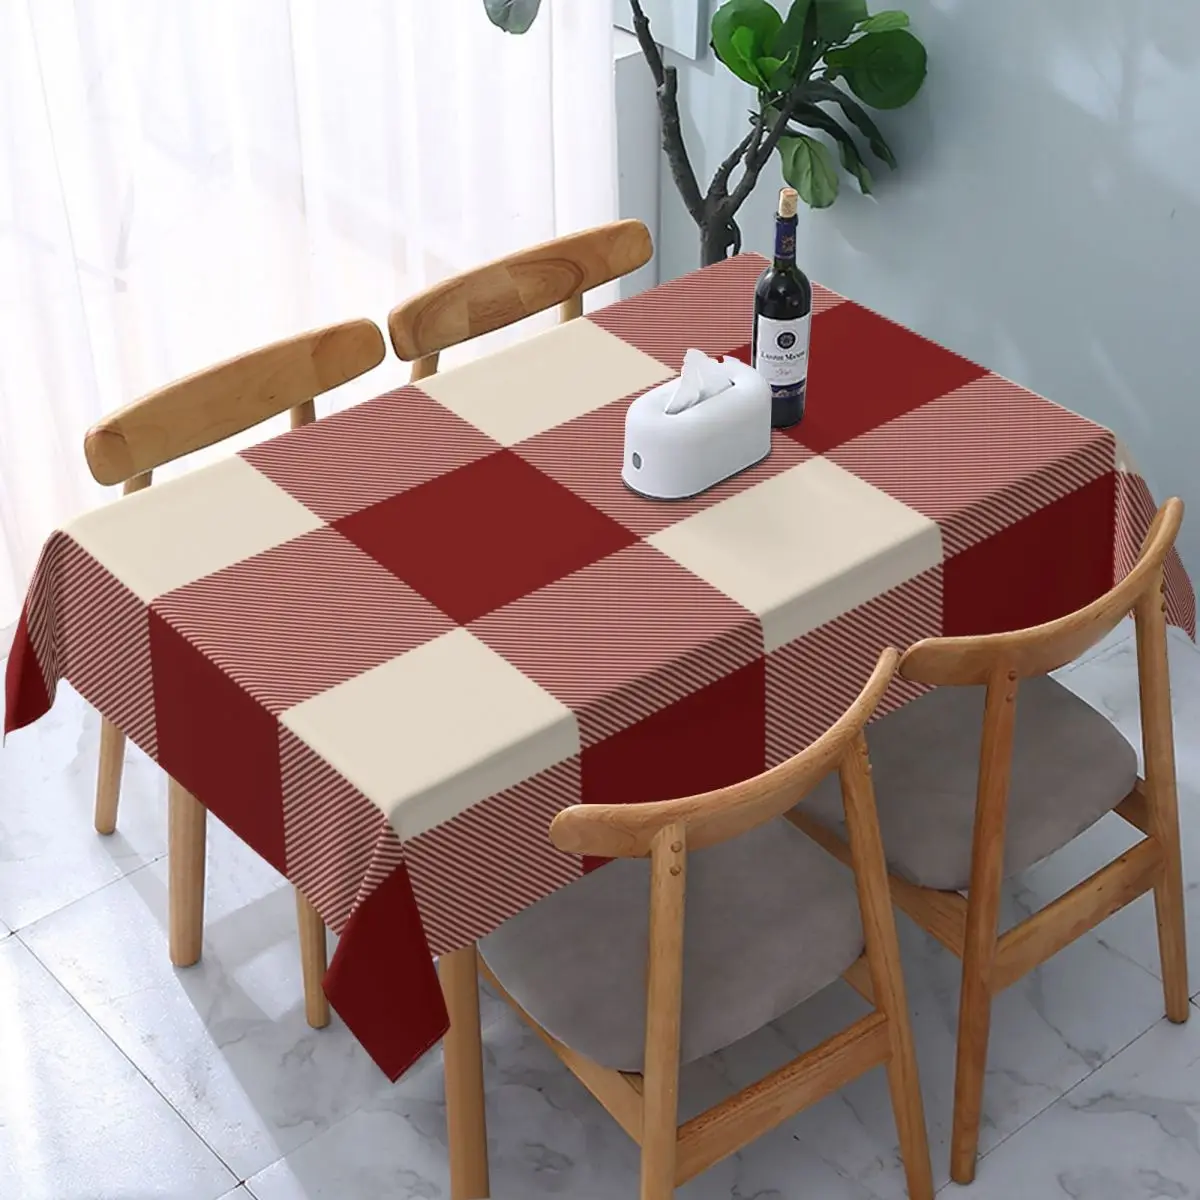 

Waterproof Buffalo Check Red White Plaid Tartan Striped Tablecloth Backing Edge Table Covers Geometric Gingham Table Cloth